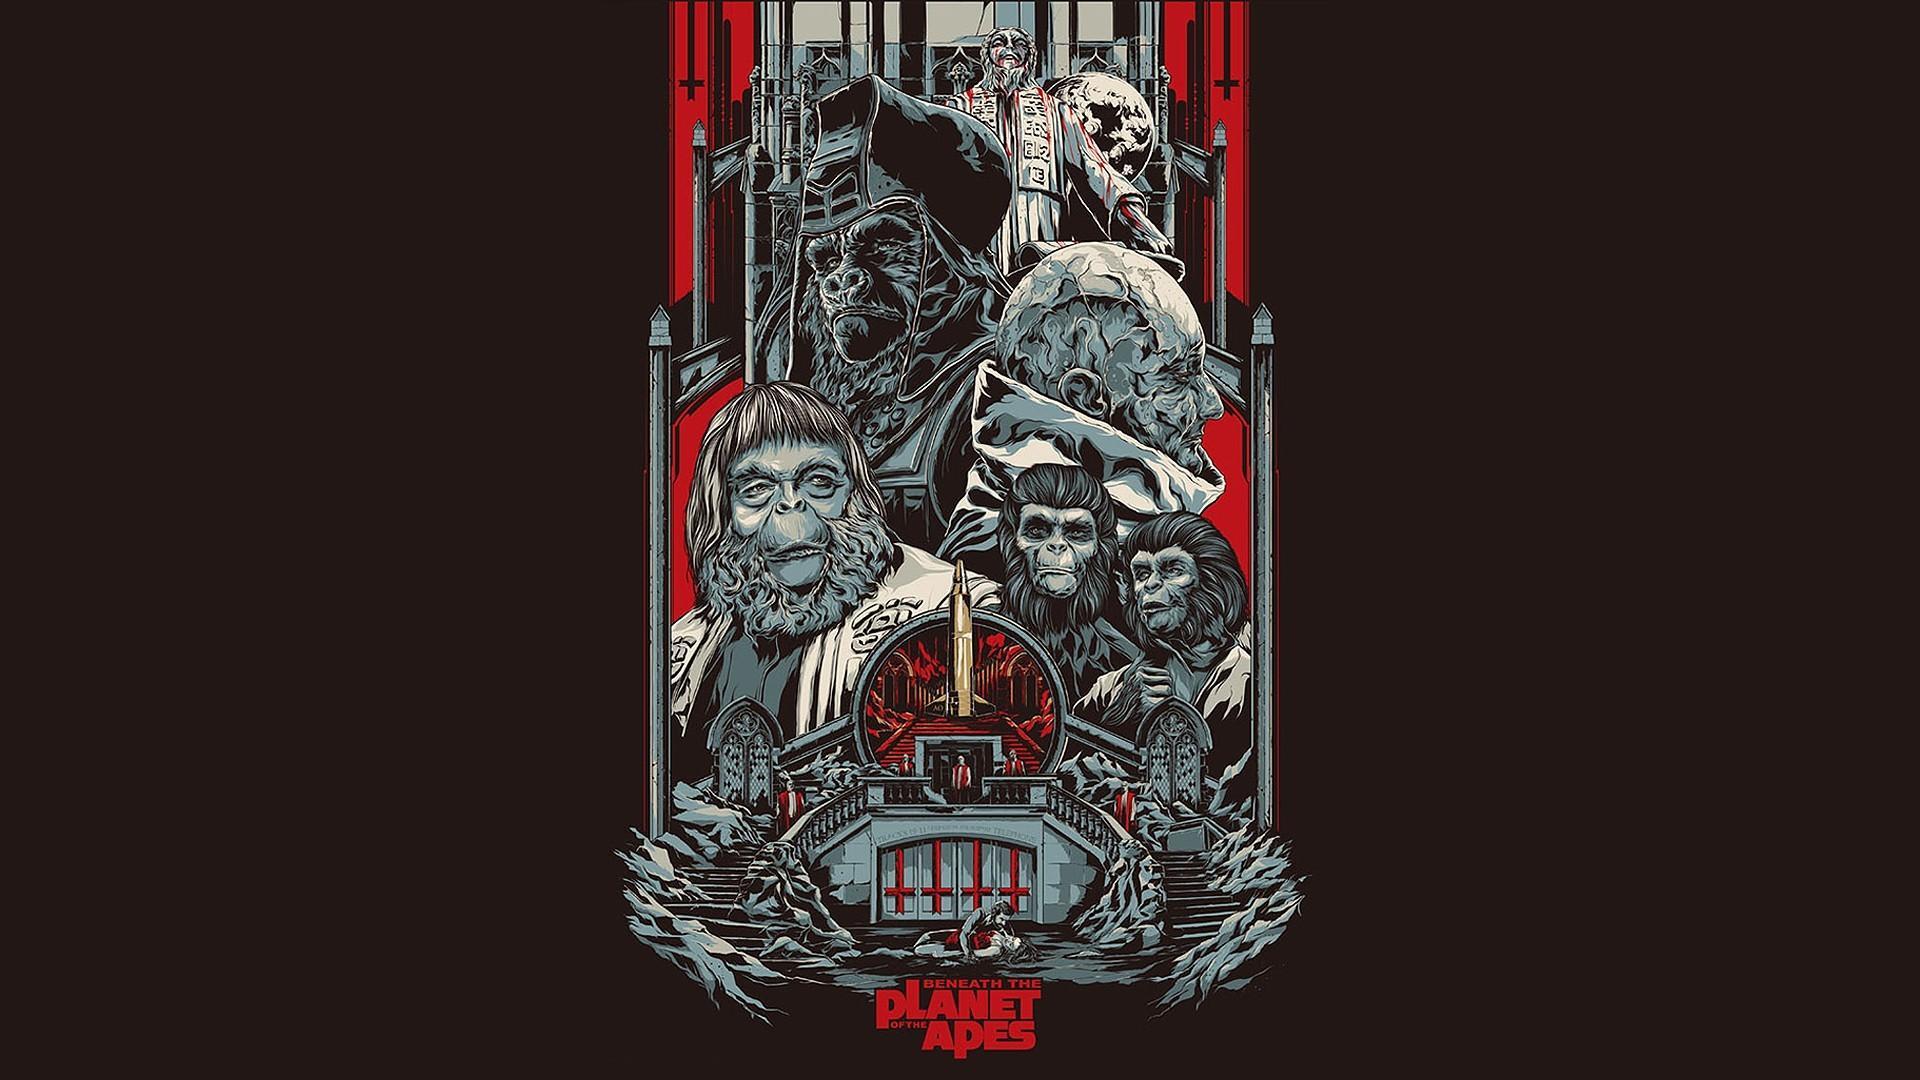 Earth planet of the apes fan art humans Wallpaper